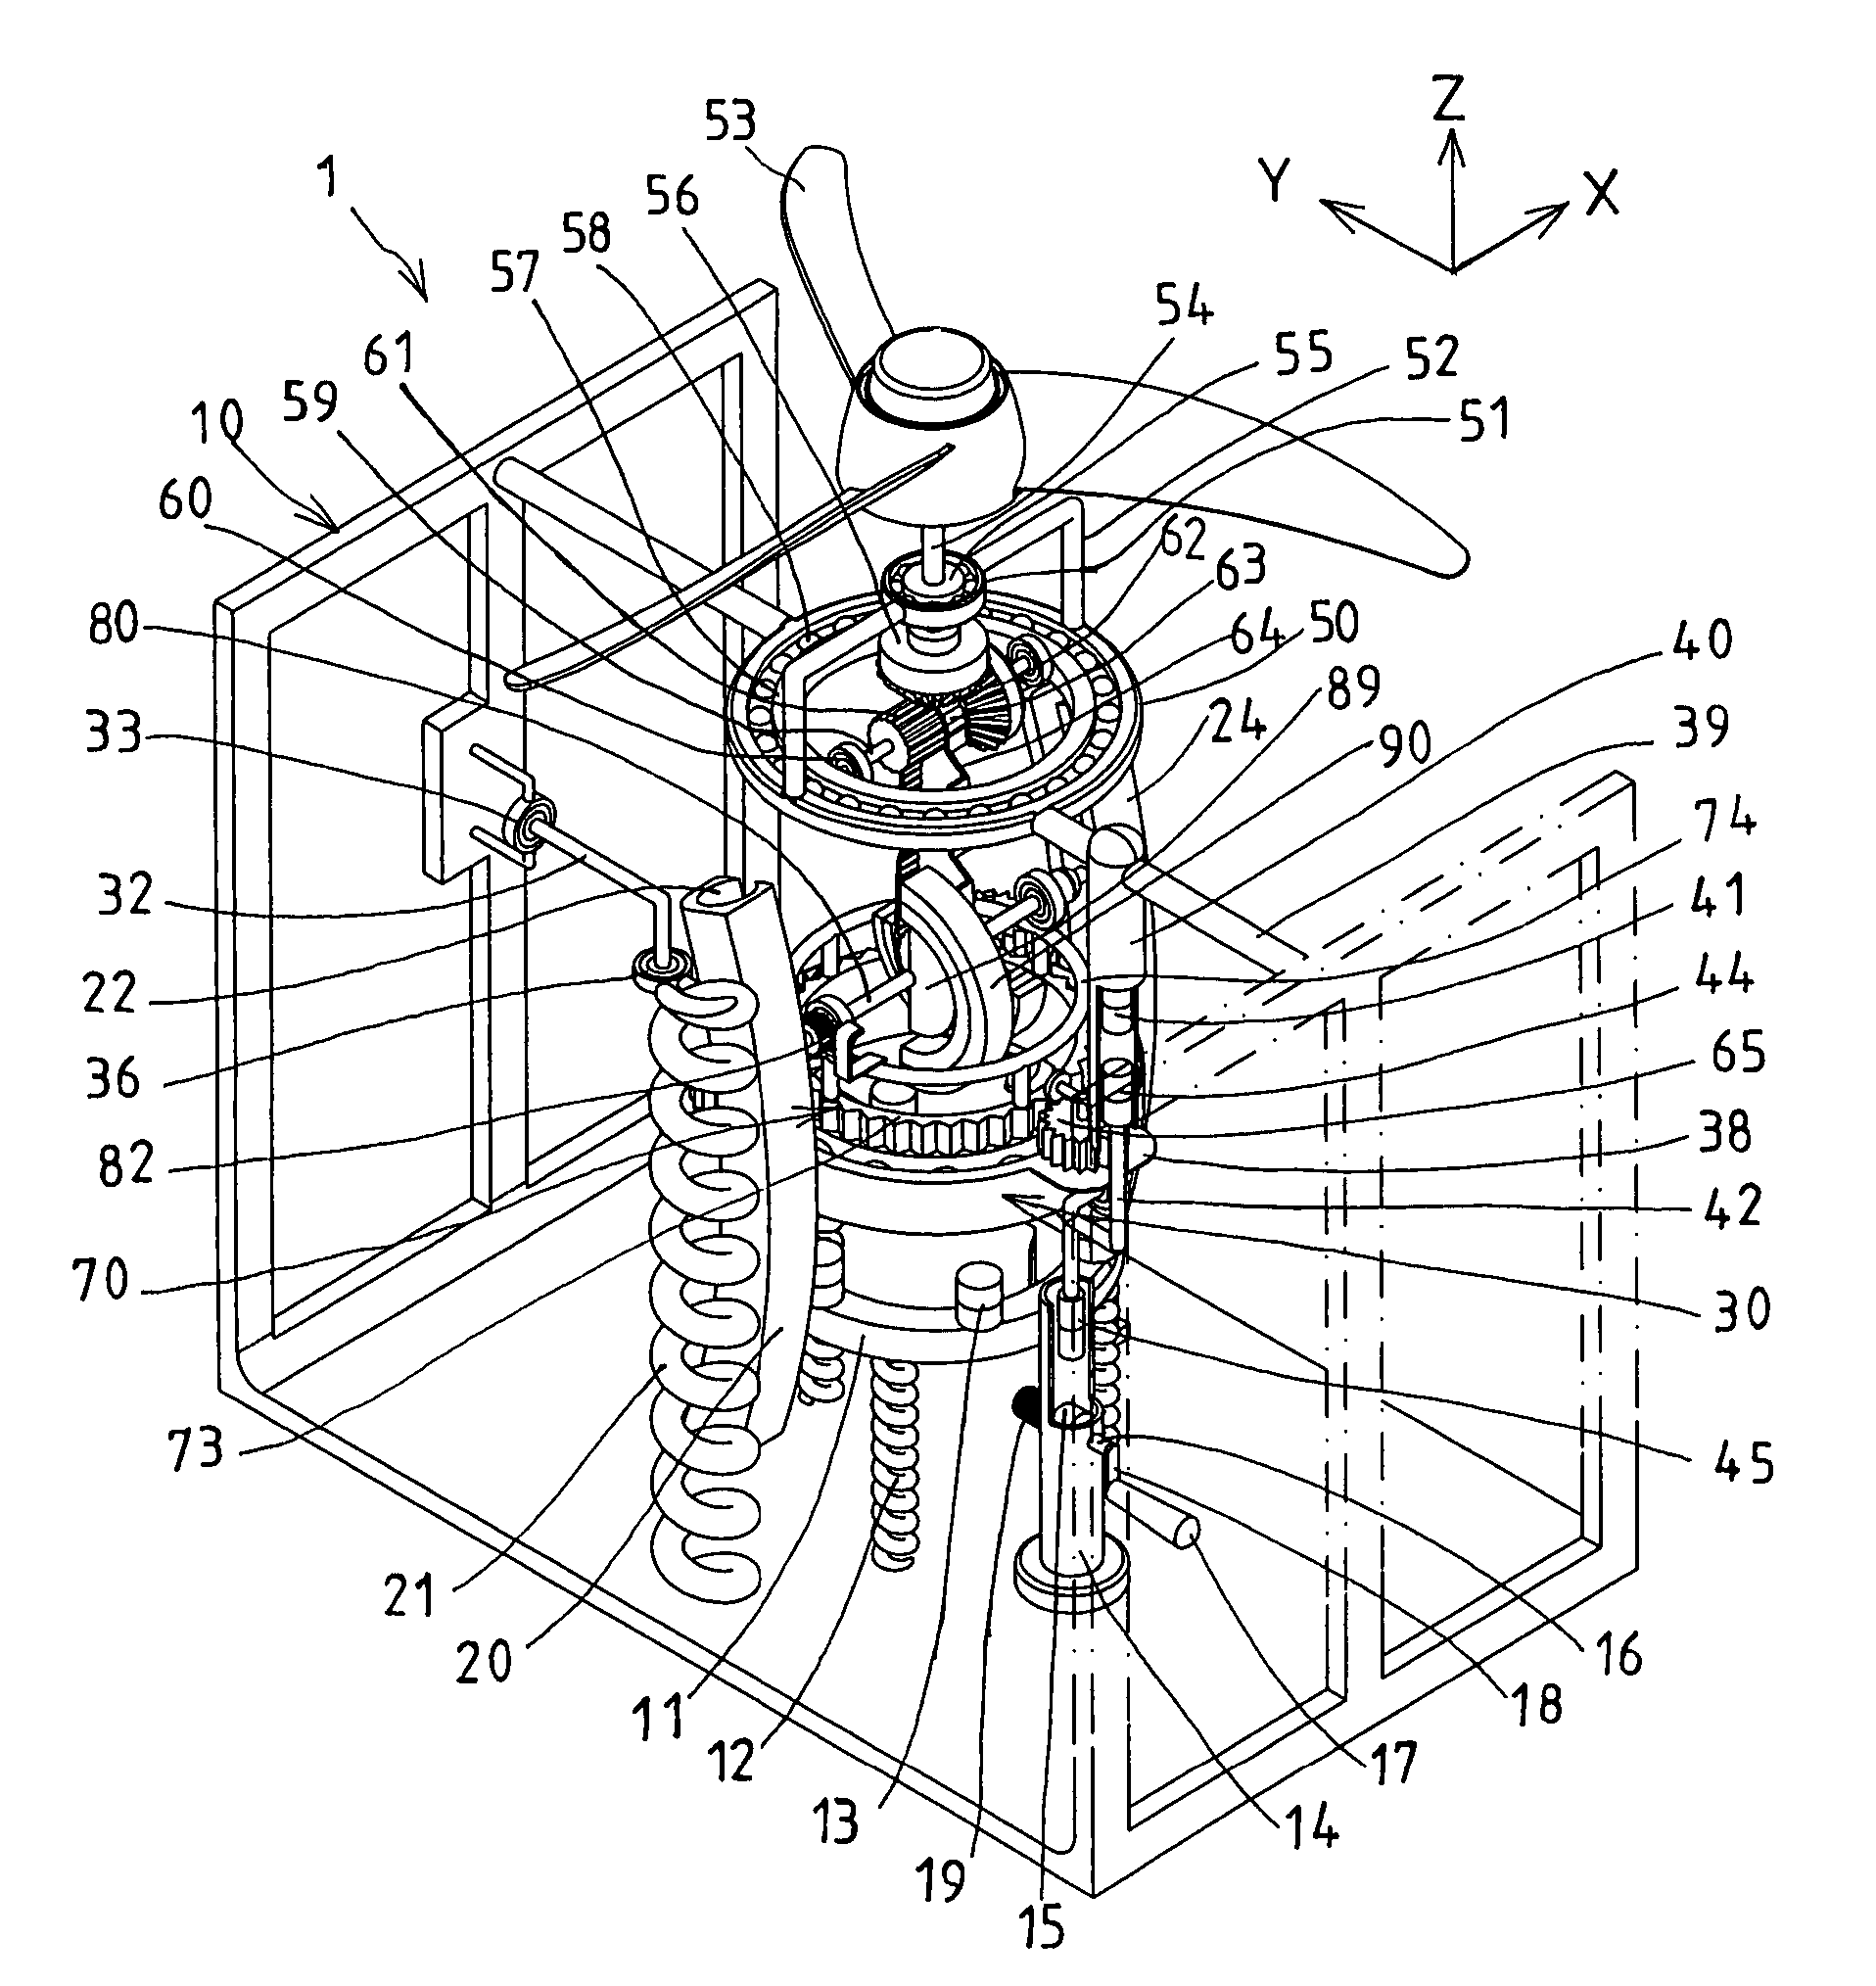 Magnetically operated fan device